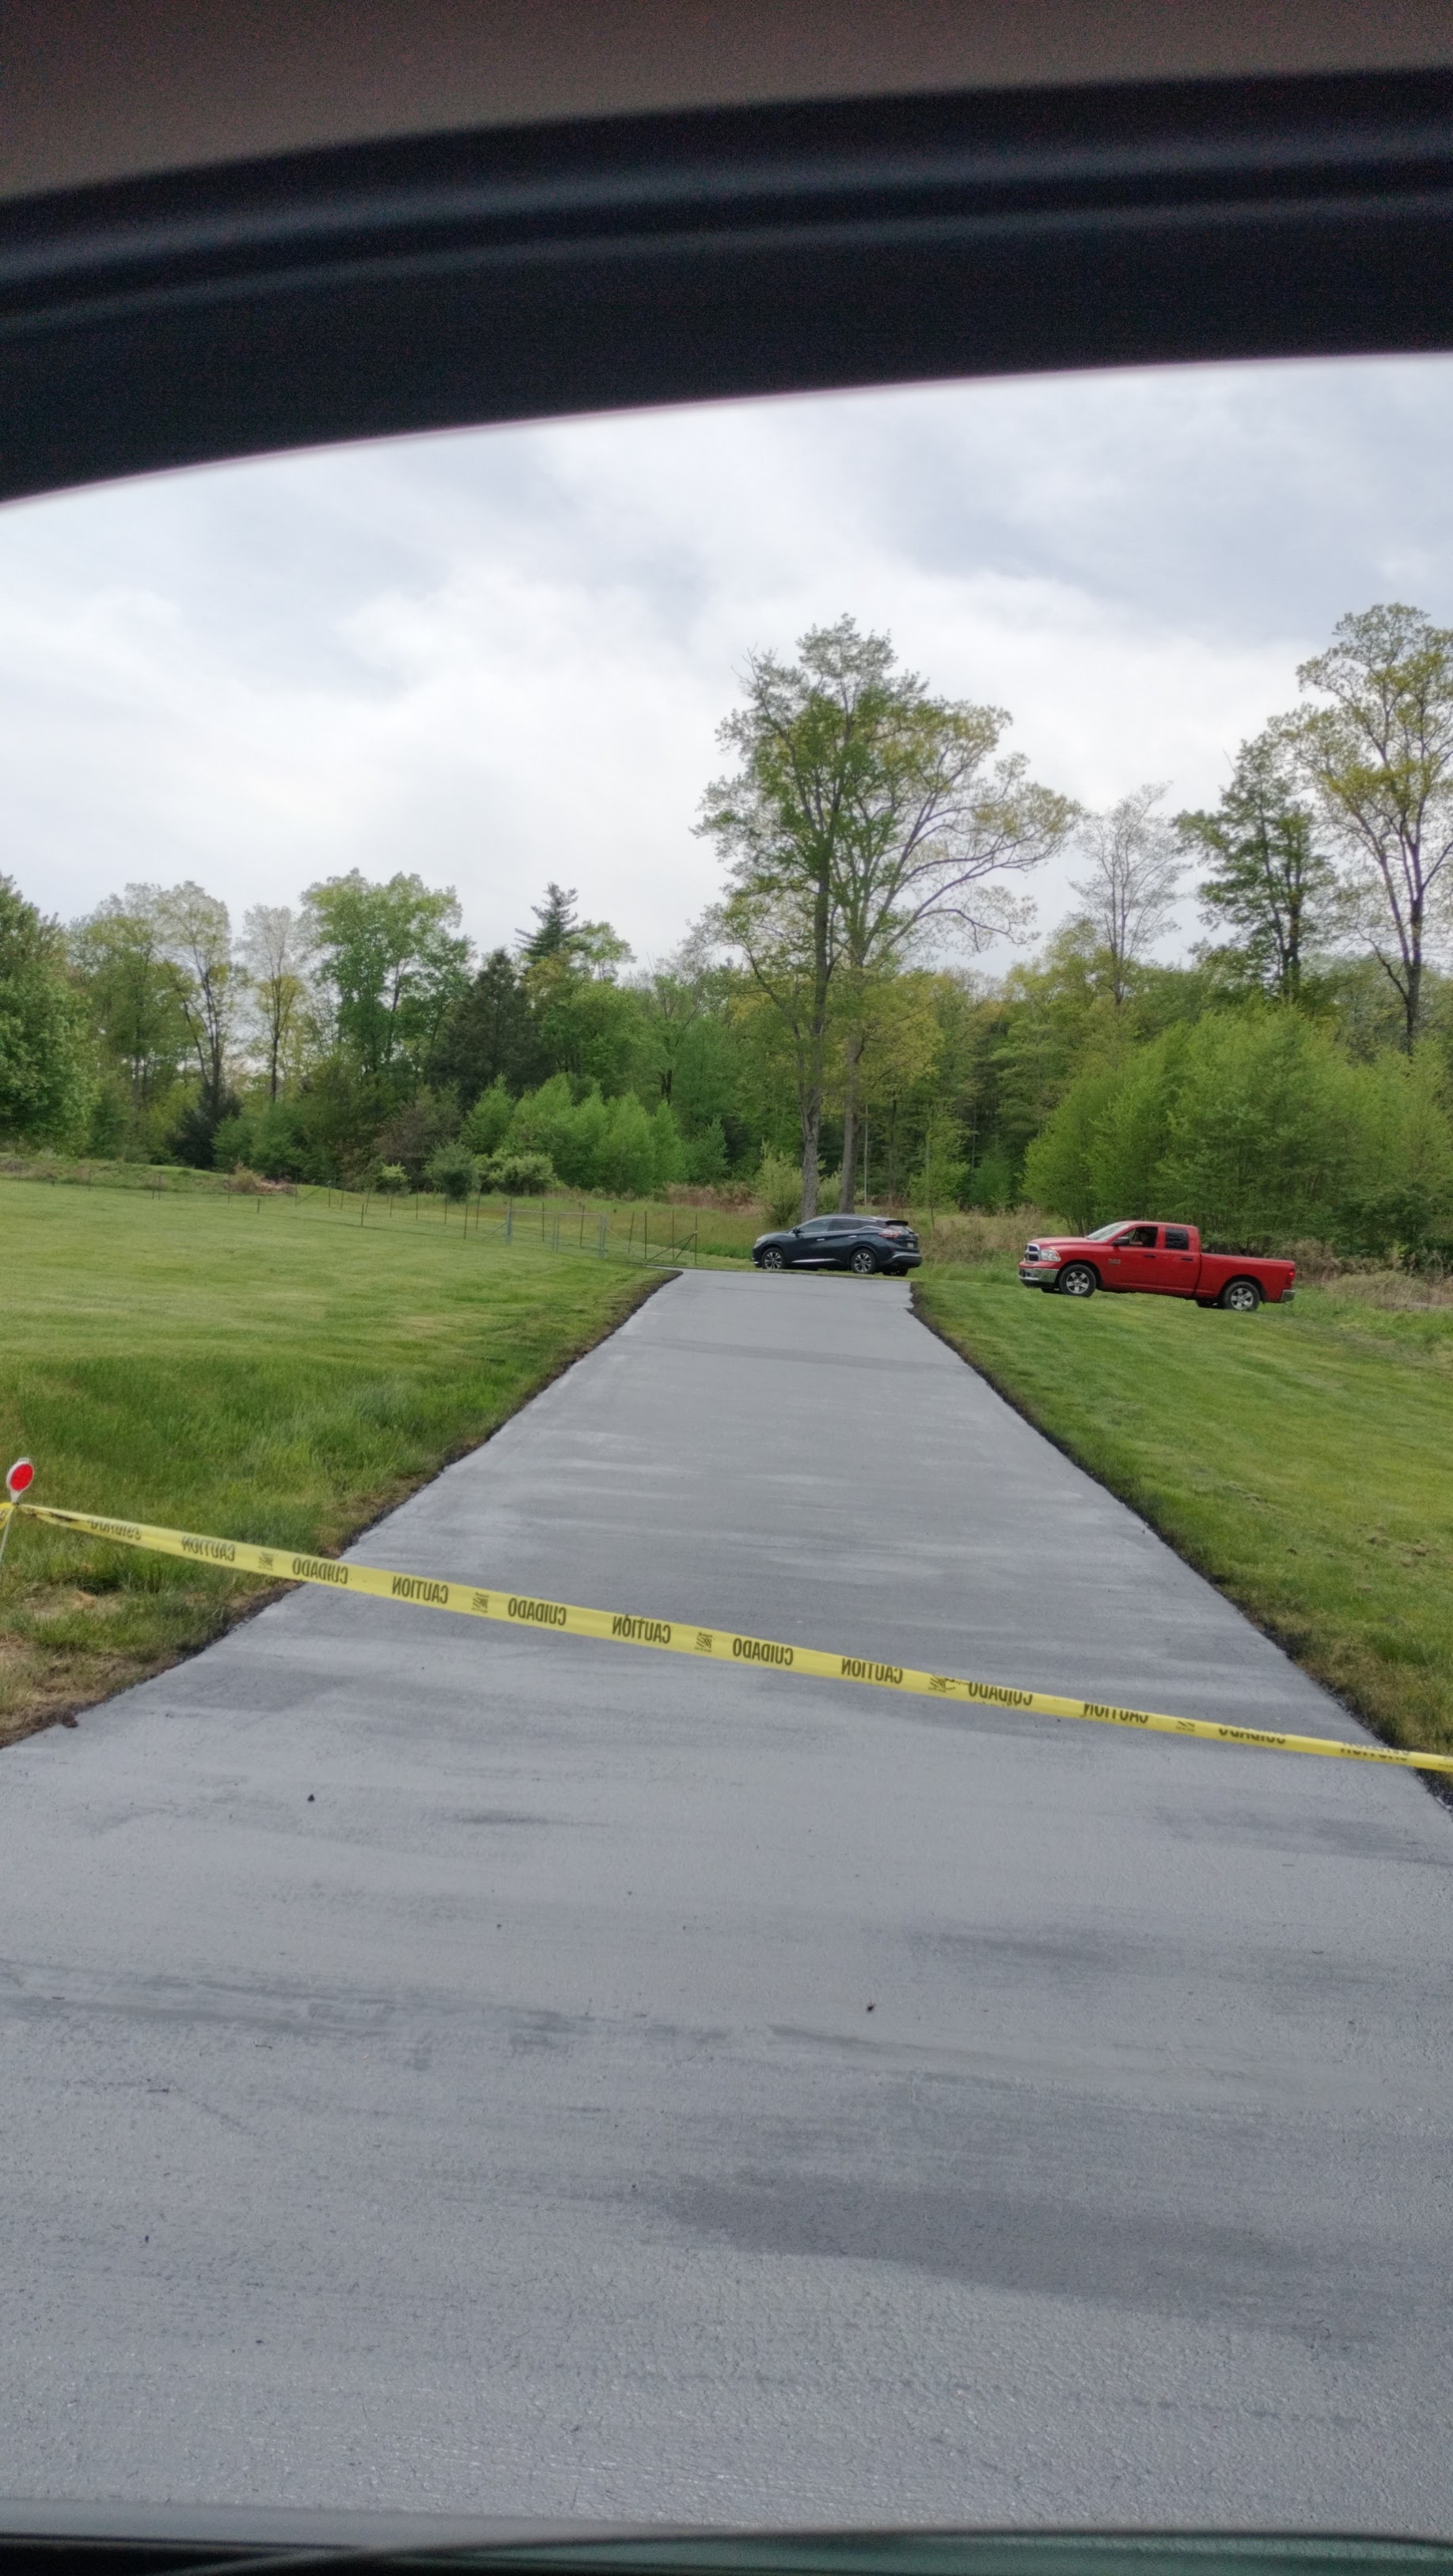 We specialize in efficient asphalt patching to address various pavement issues. Young and Son's Asphalt & SealCoating in Wilkes-Barre, PA, ensures that your asphalt remains in excellent condition, preventing further damage.